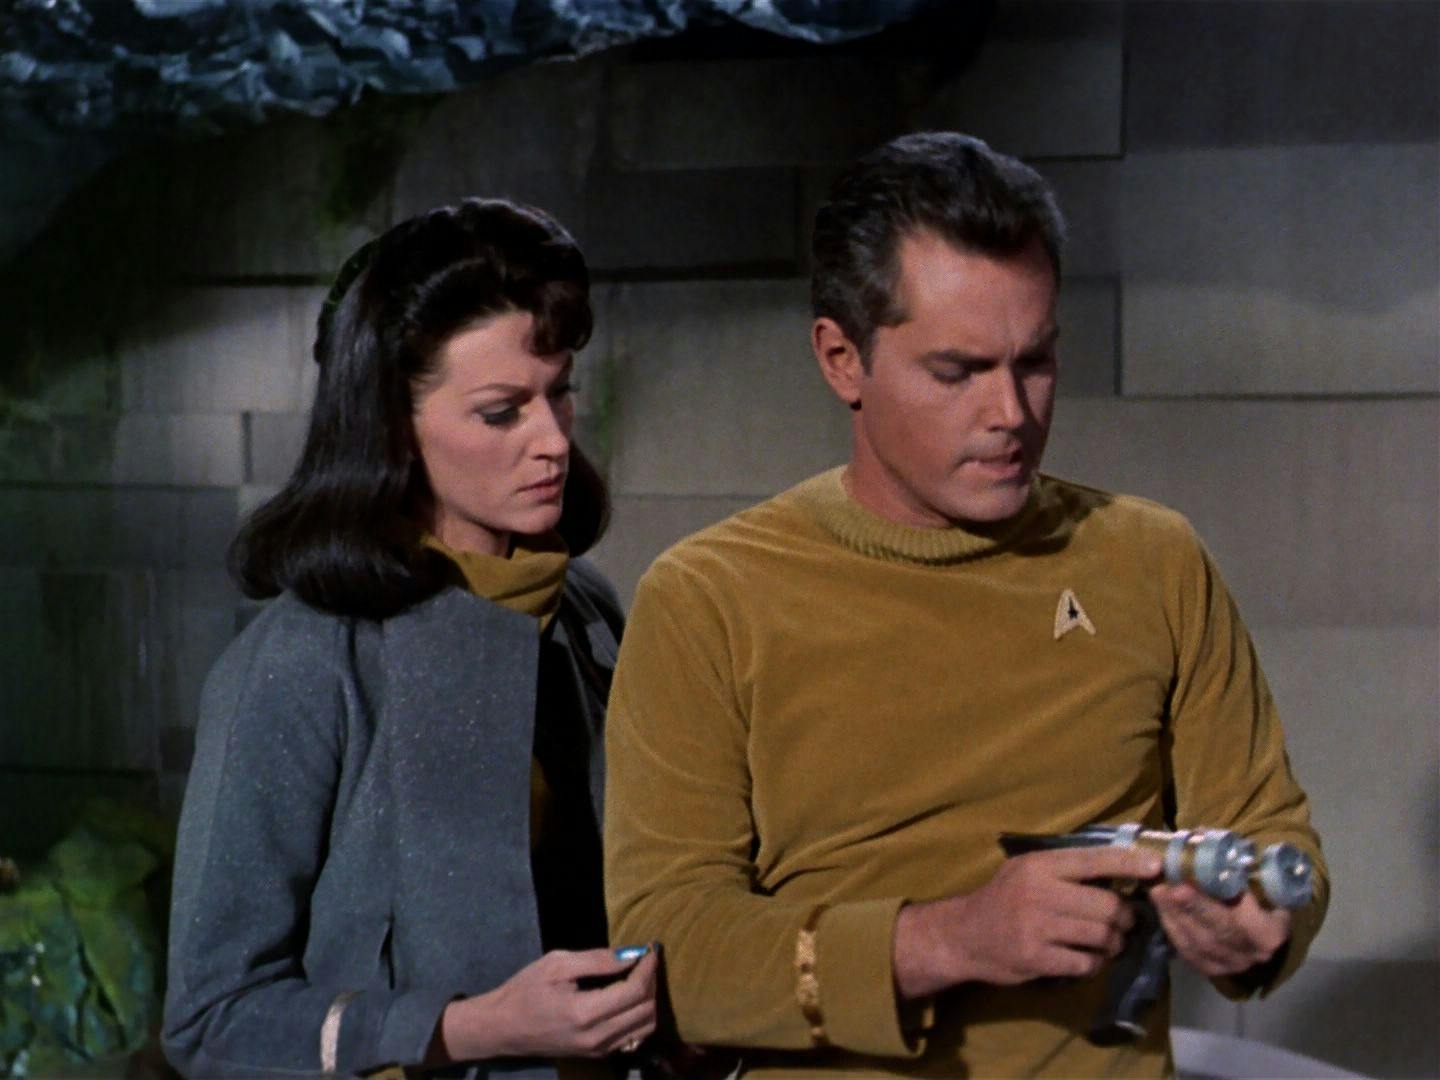 Captain Pike holds a phaser